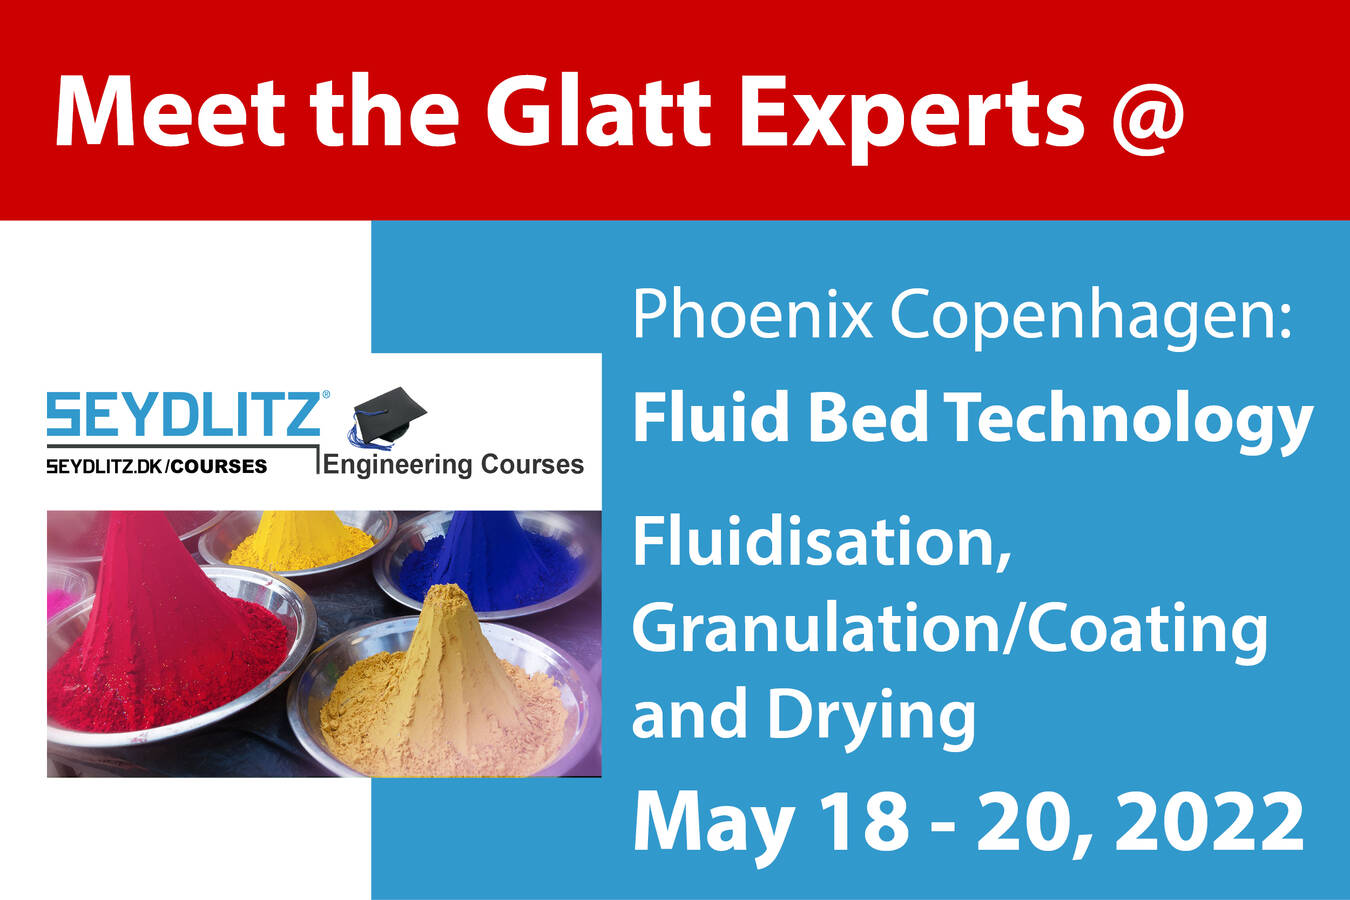 Meet the Glatt experts in a course about Fluidized Bed Technology, from May 18 - 20 2022 in Phoenix Copenhagen. Part of the Seydlitz Engineering Courses